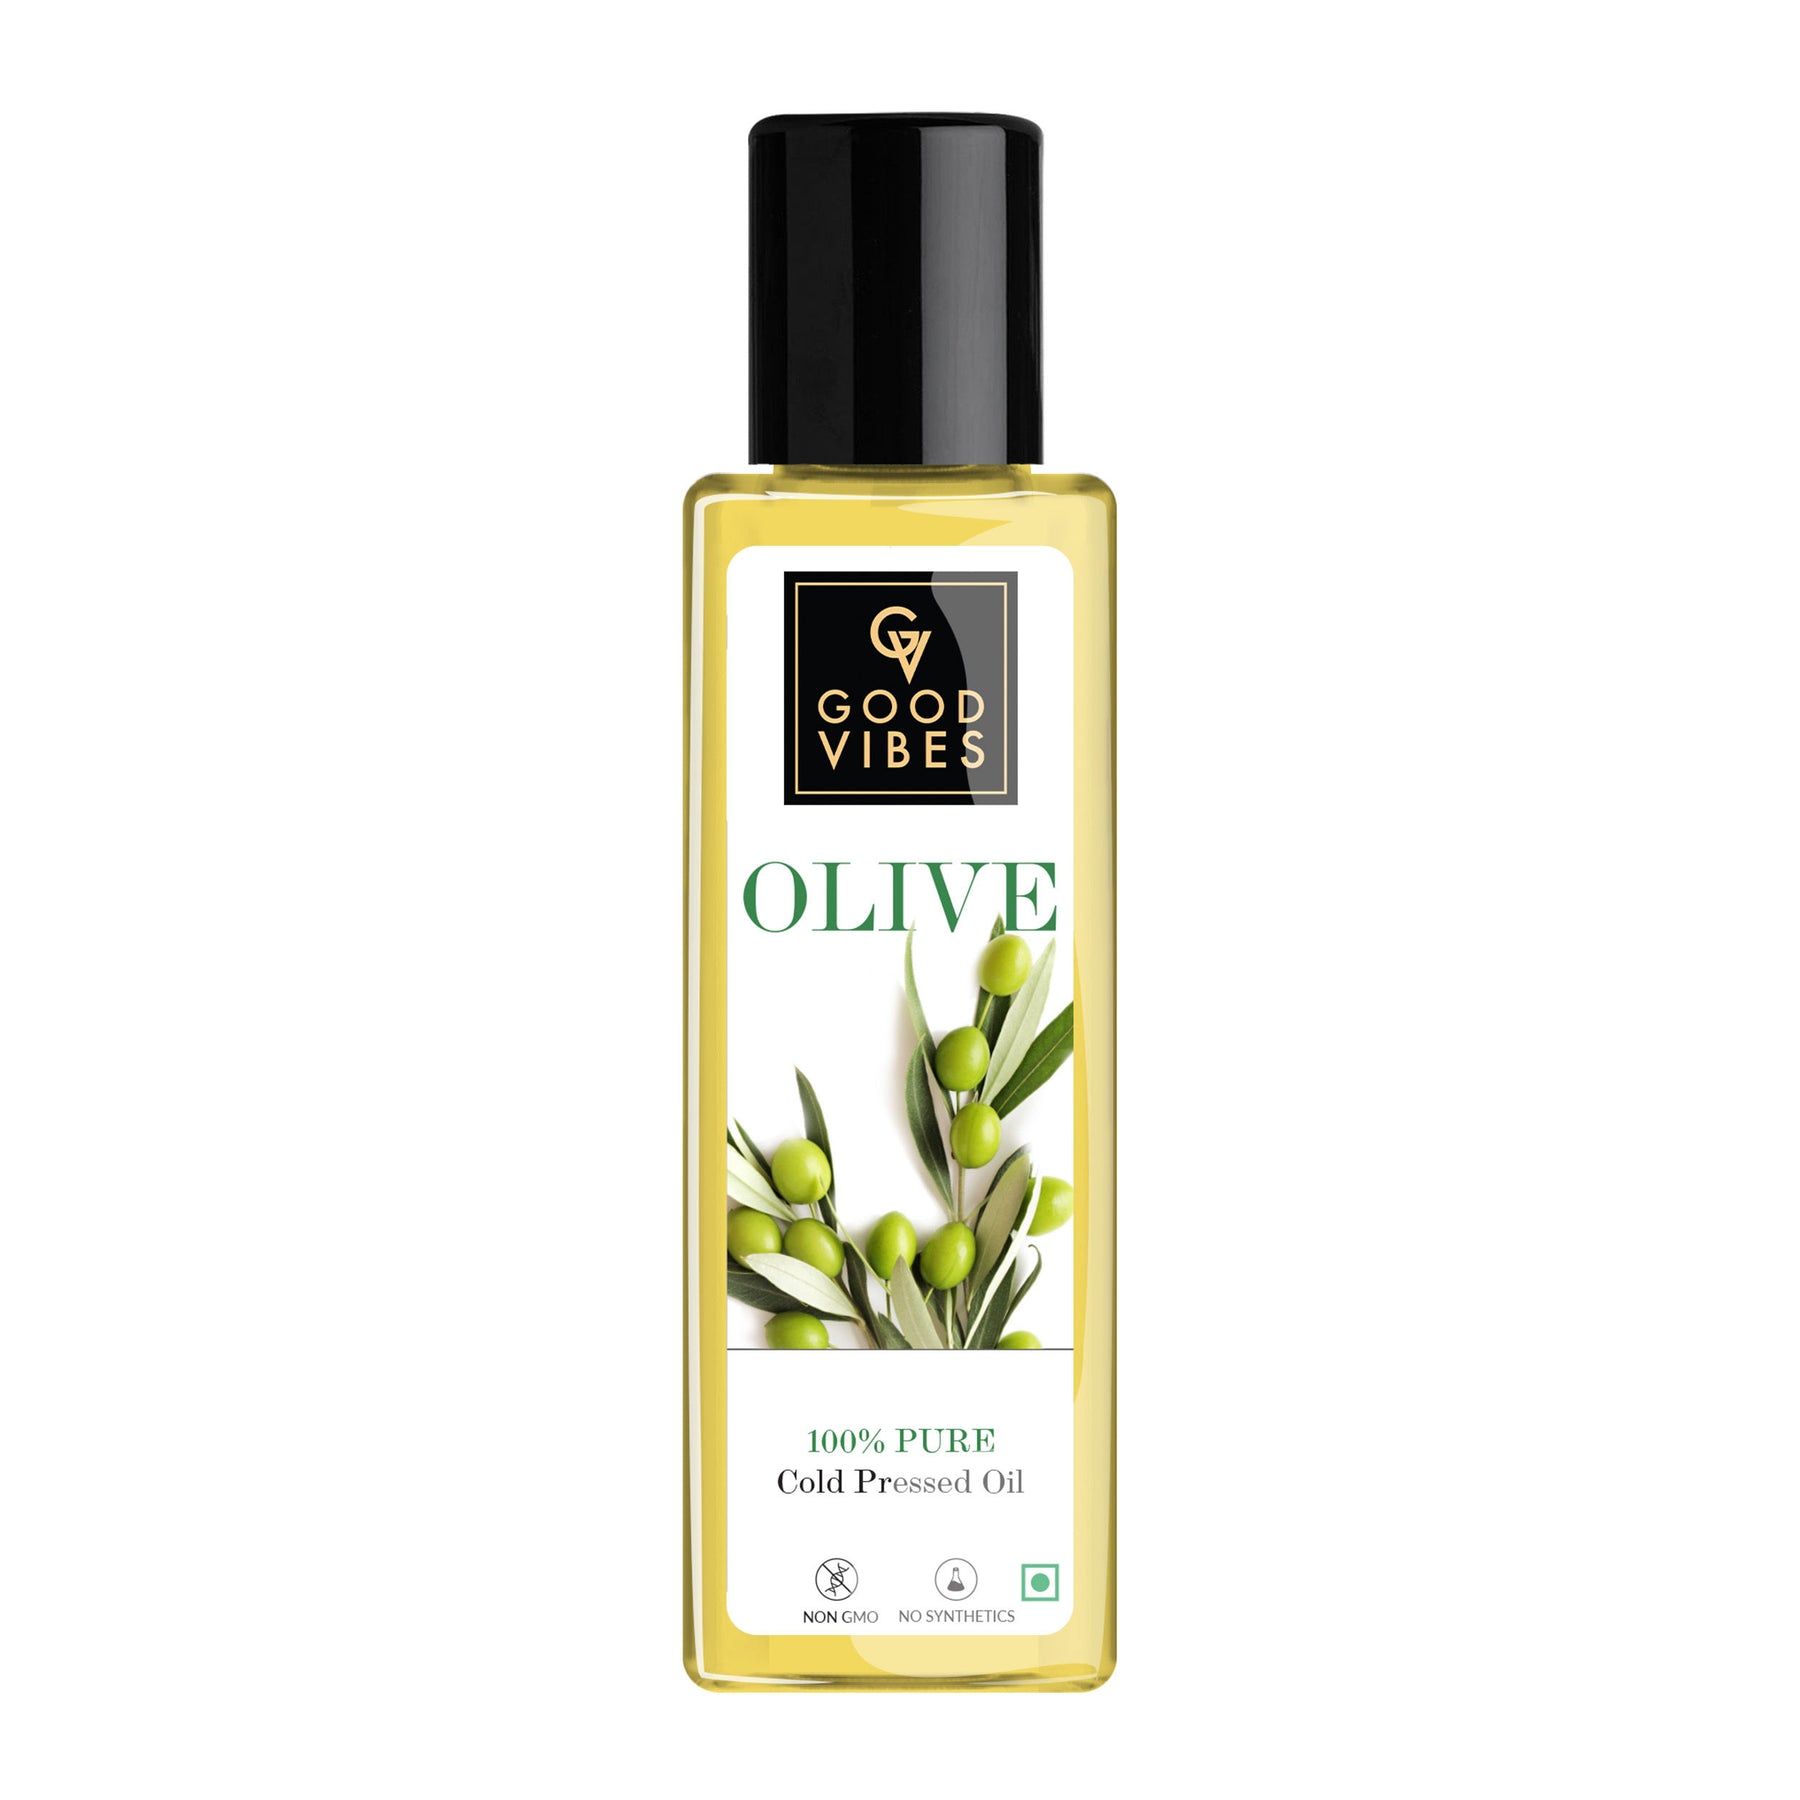 Which Olive Oil is Good for Hair? - Olive Oil Turkey